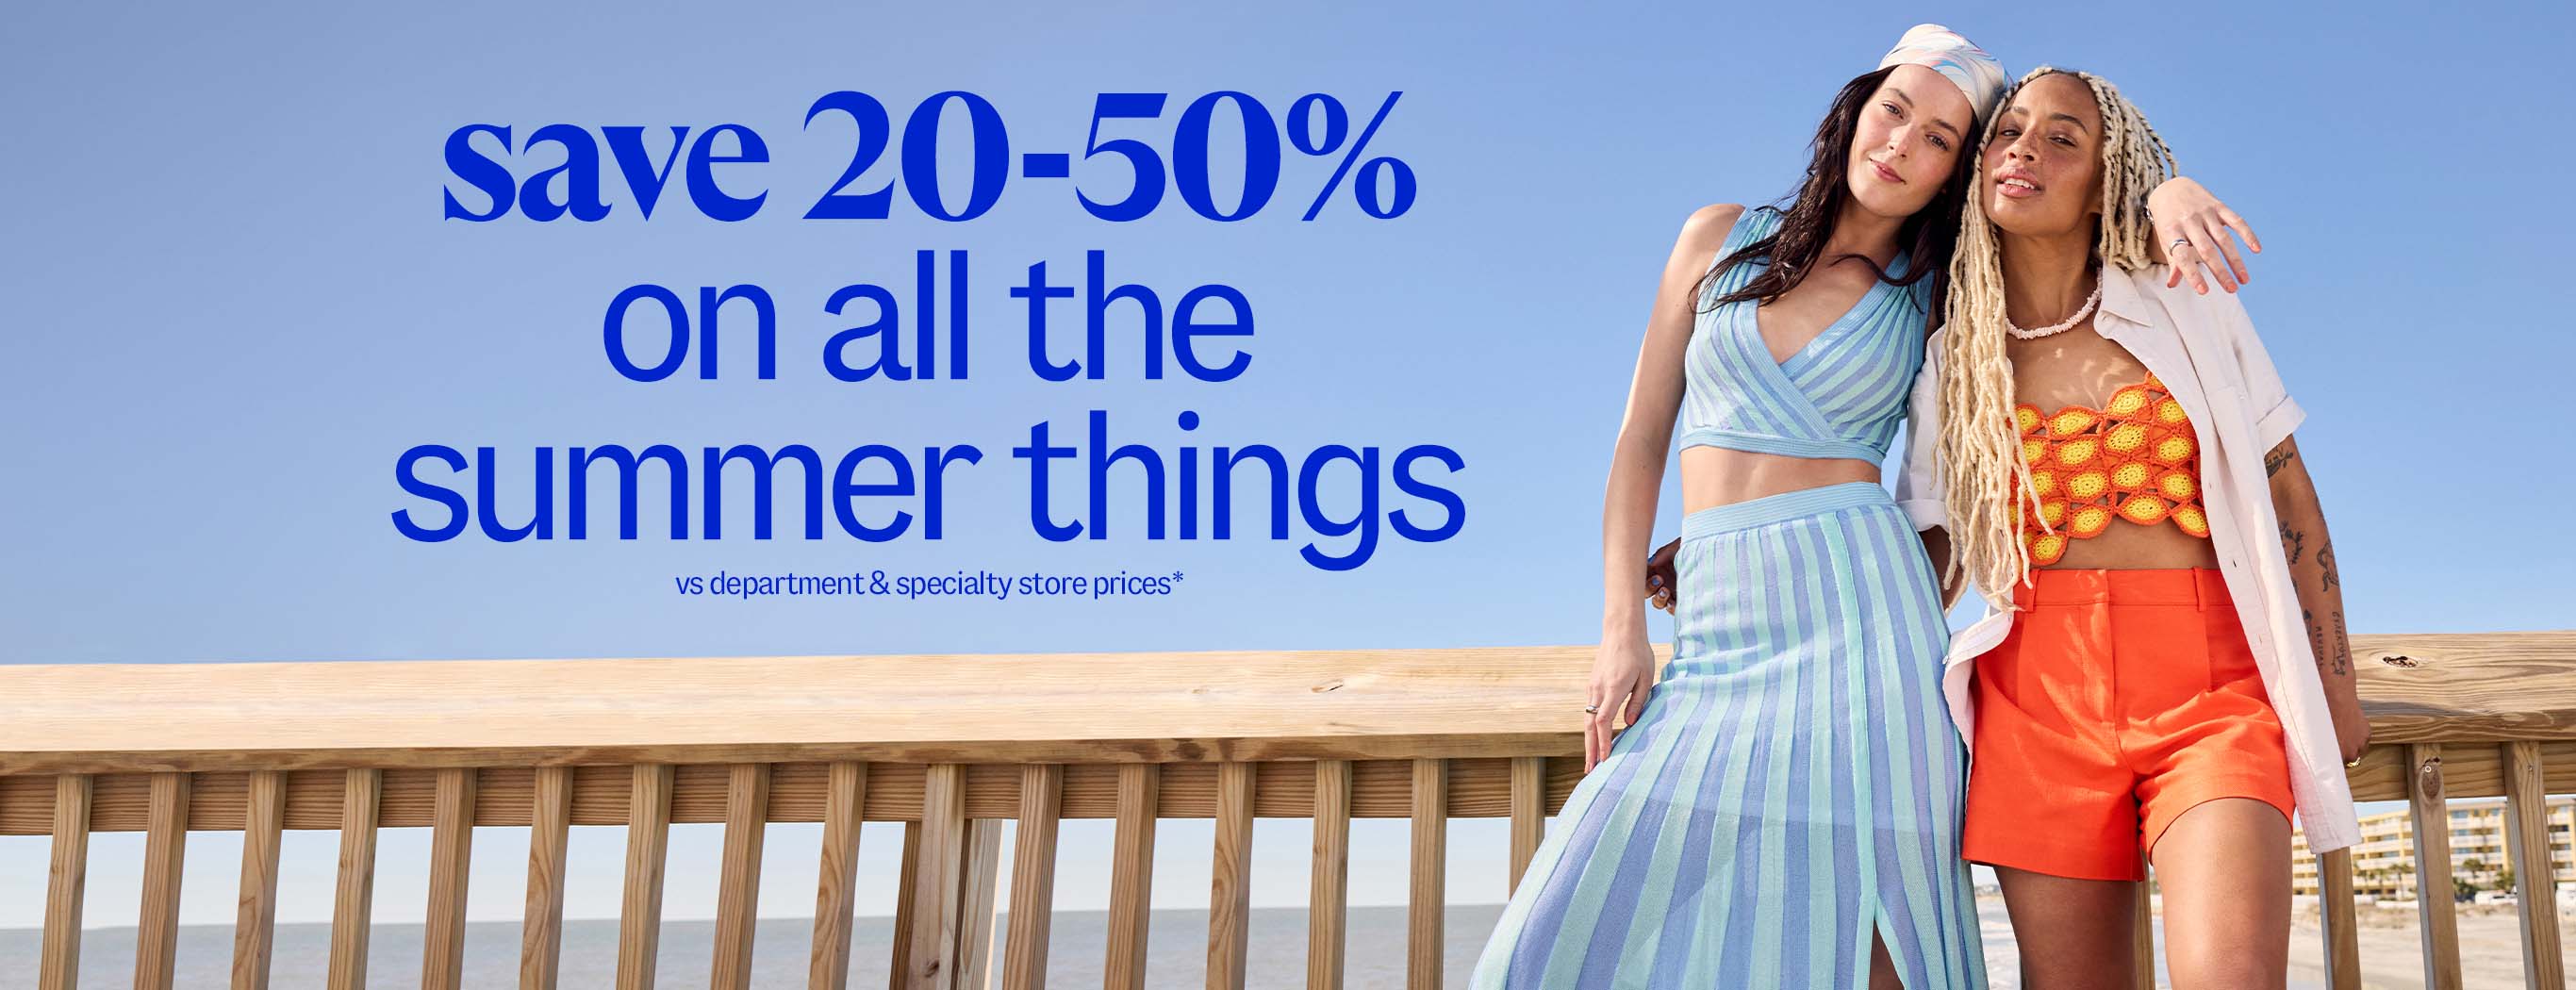 save 20-50% on all the summer things vs department & specialty store prices*.